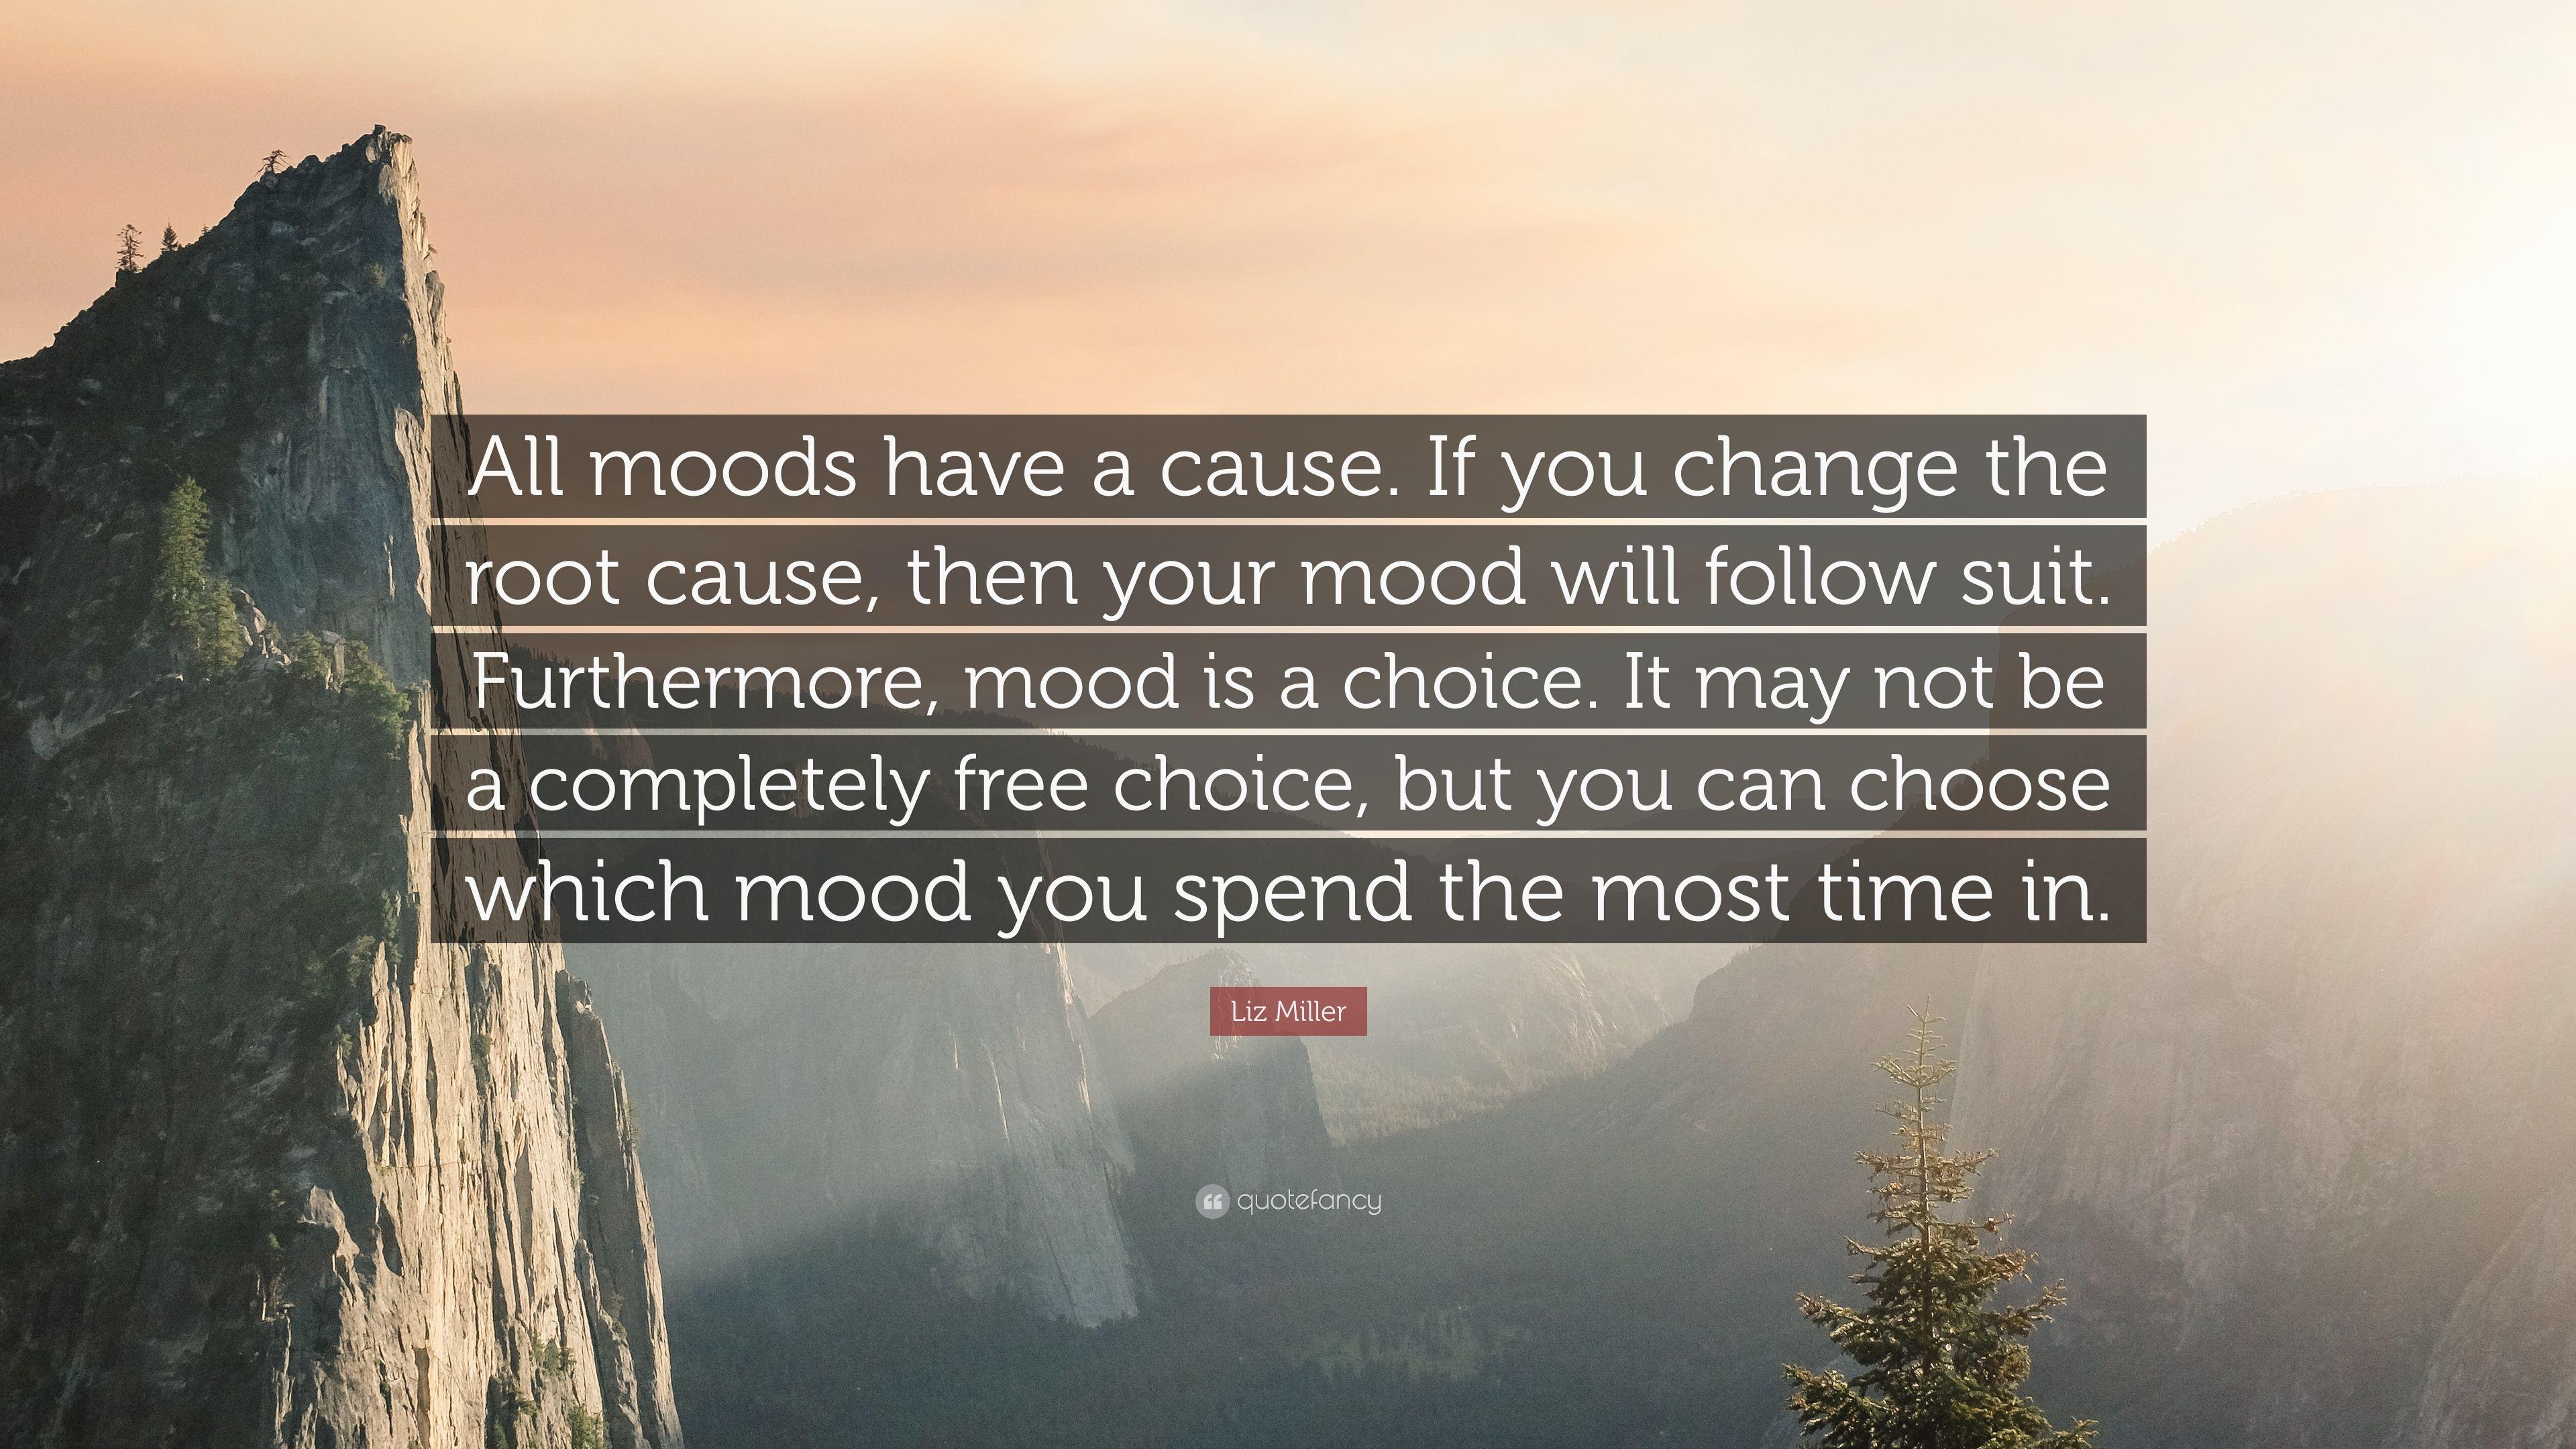 Liz Miller Quote: “All moods have a cause. If you change the root